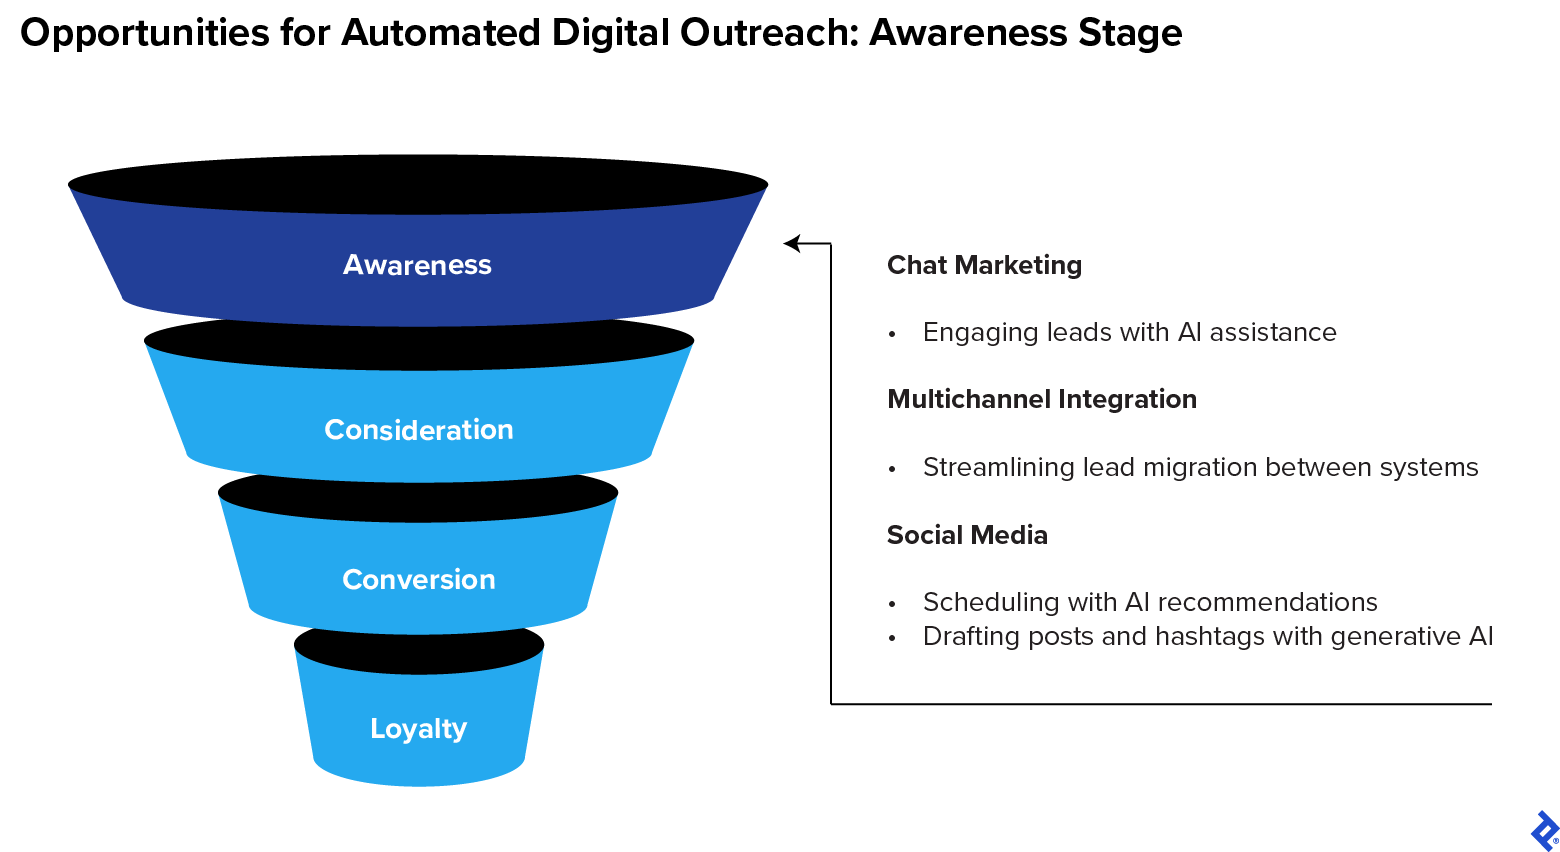 Automation ideas for awareness-stage outreach efforts: chat marketing, multichannel integration capabilities, and social media scheduling and drafting.